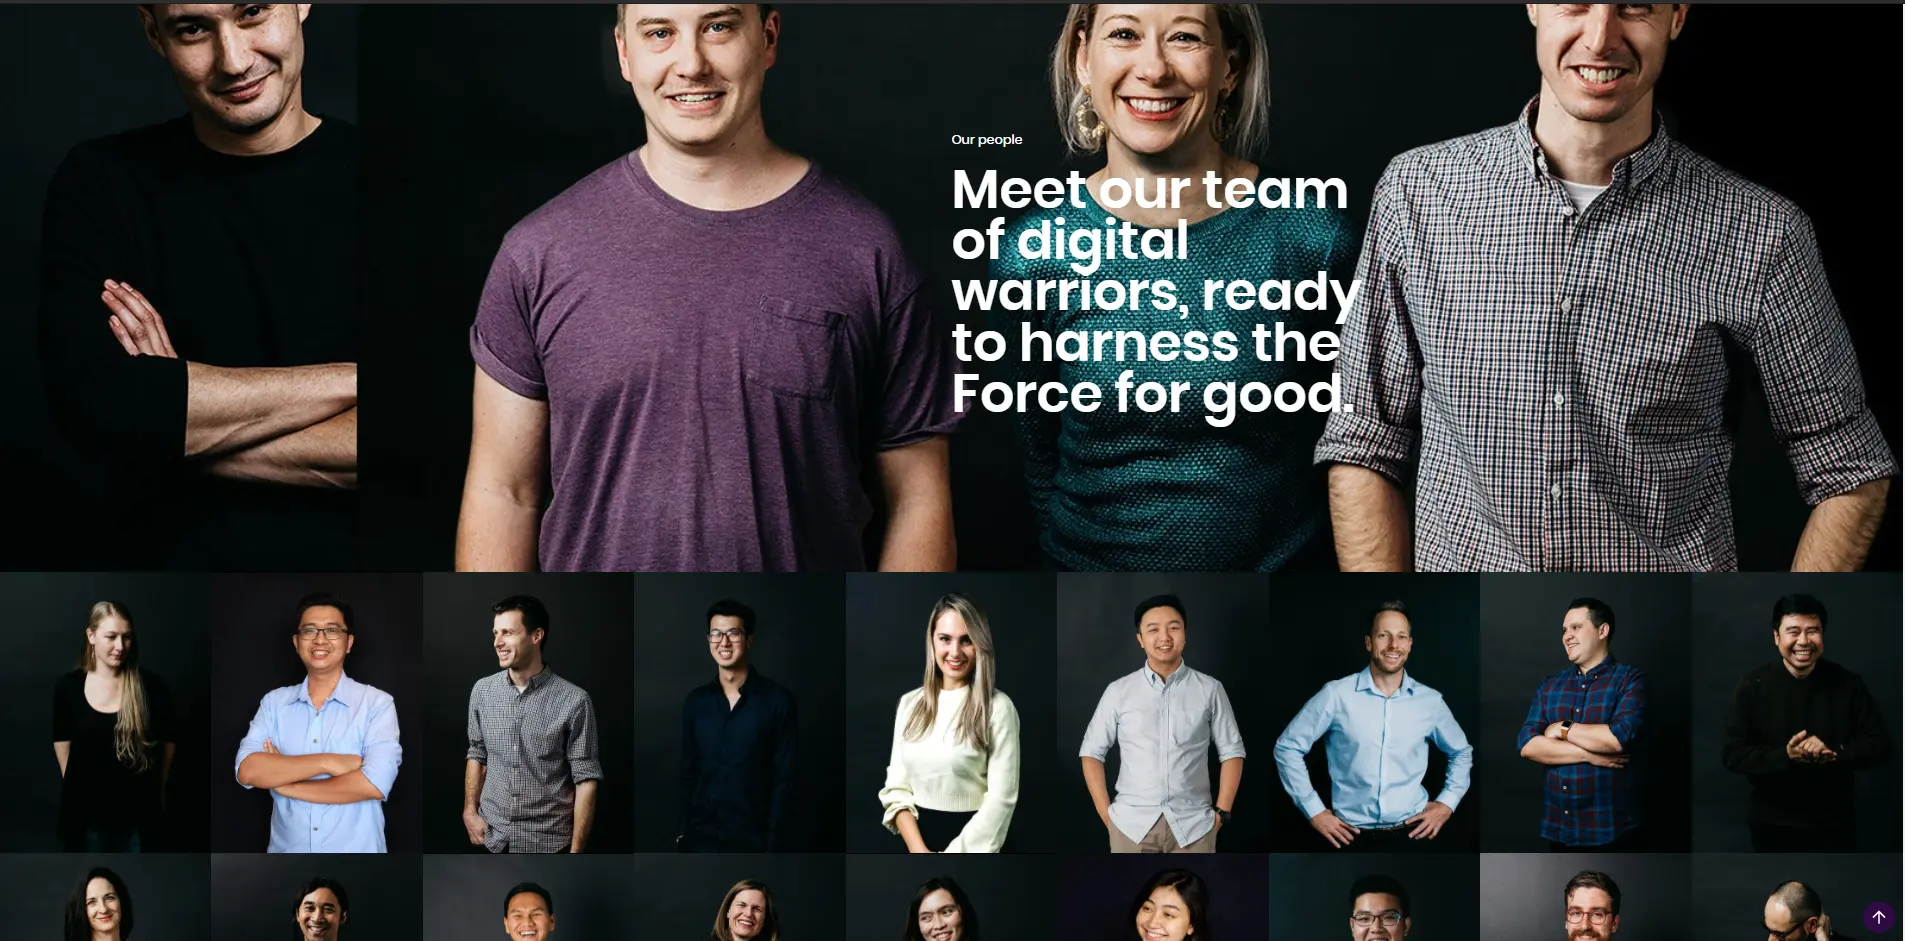 A great example of a 'Meet team' page from Luminary.com